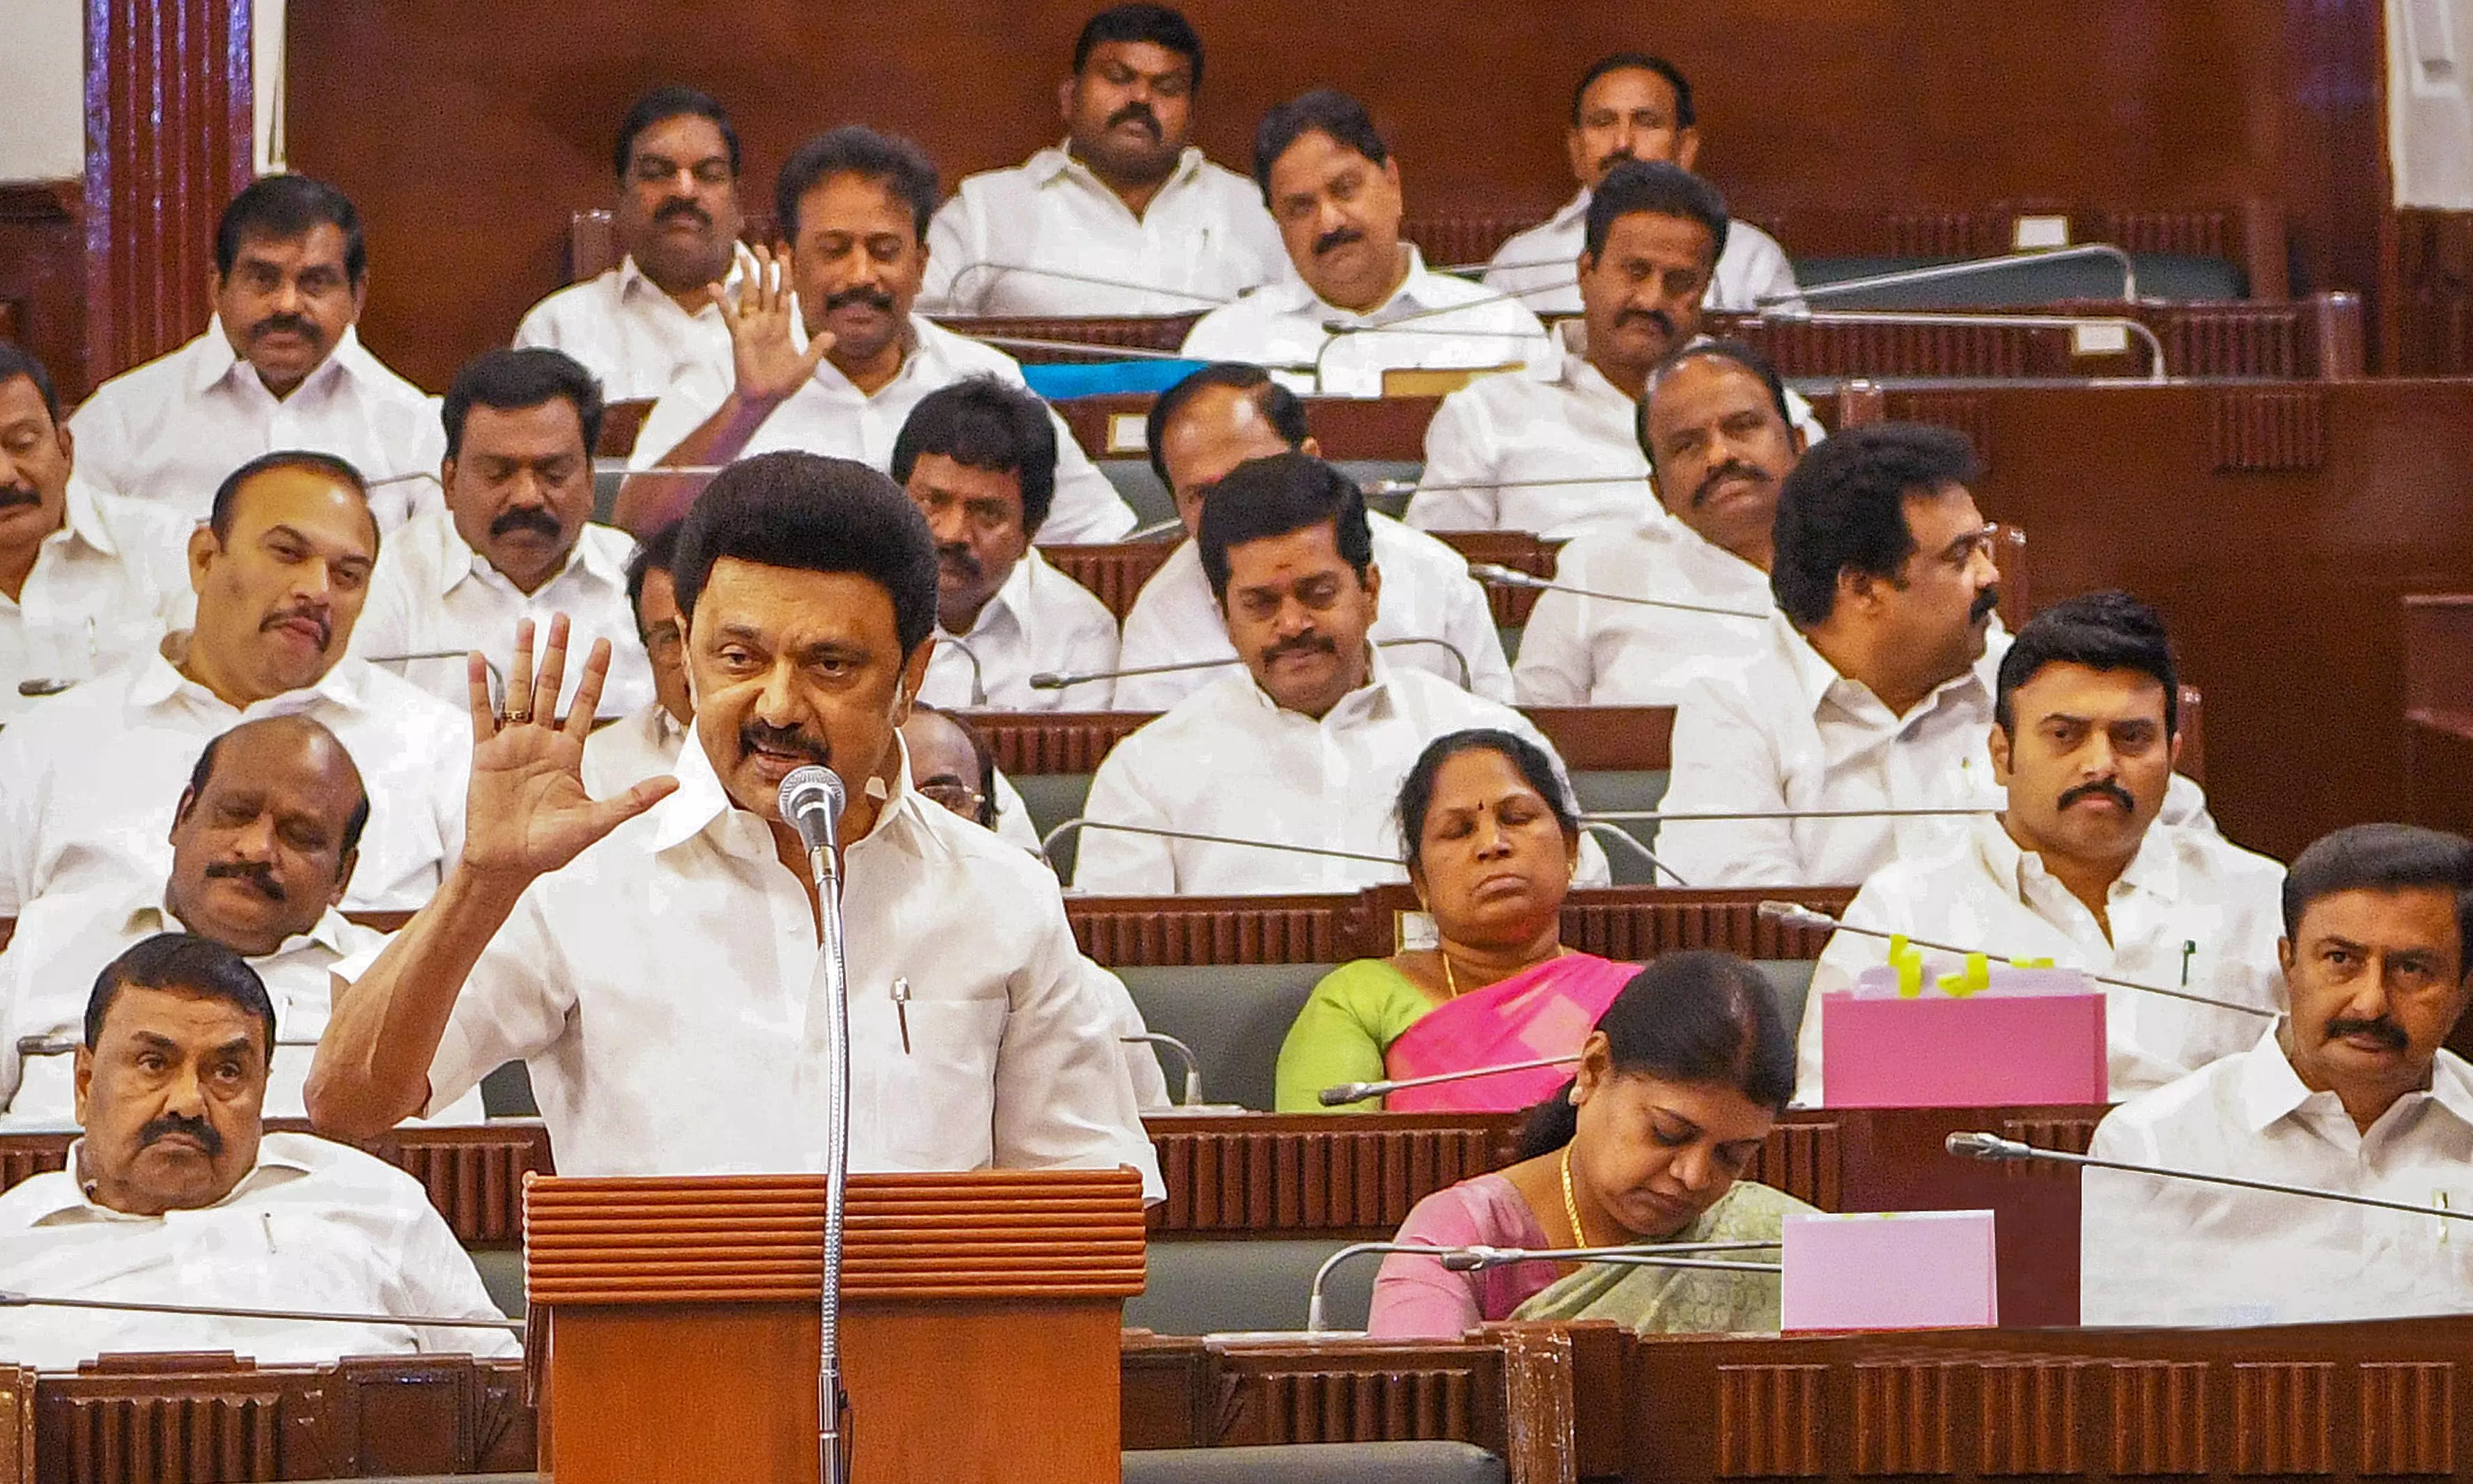 Tamil Nadu Chief Minister Stalin’s Slew of Benefits for Minorities